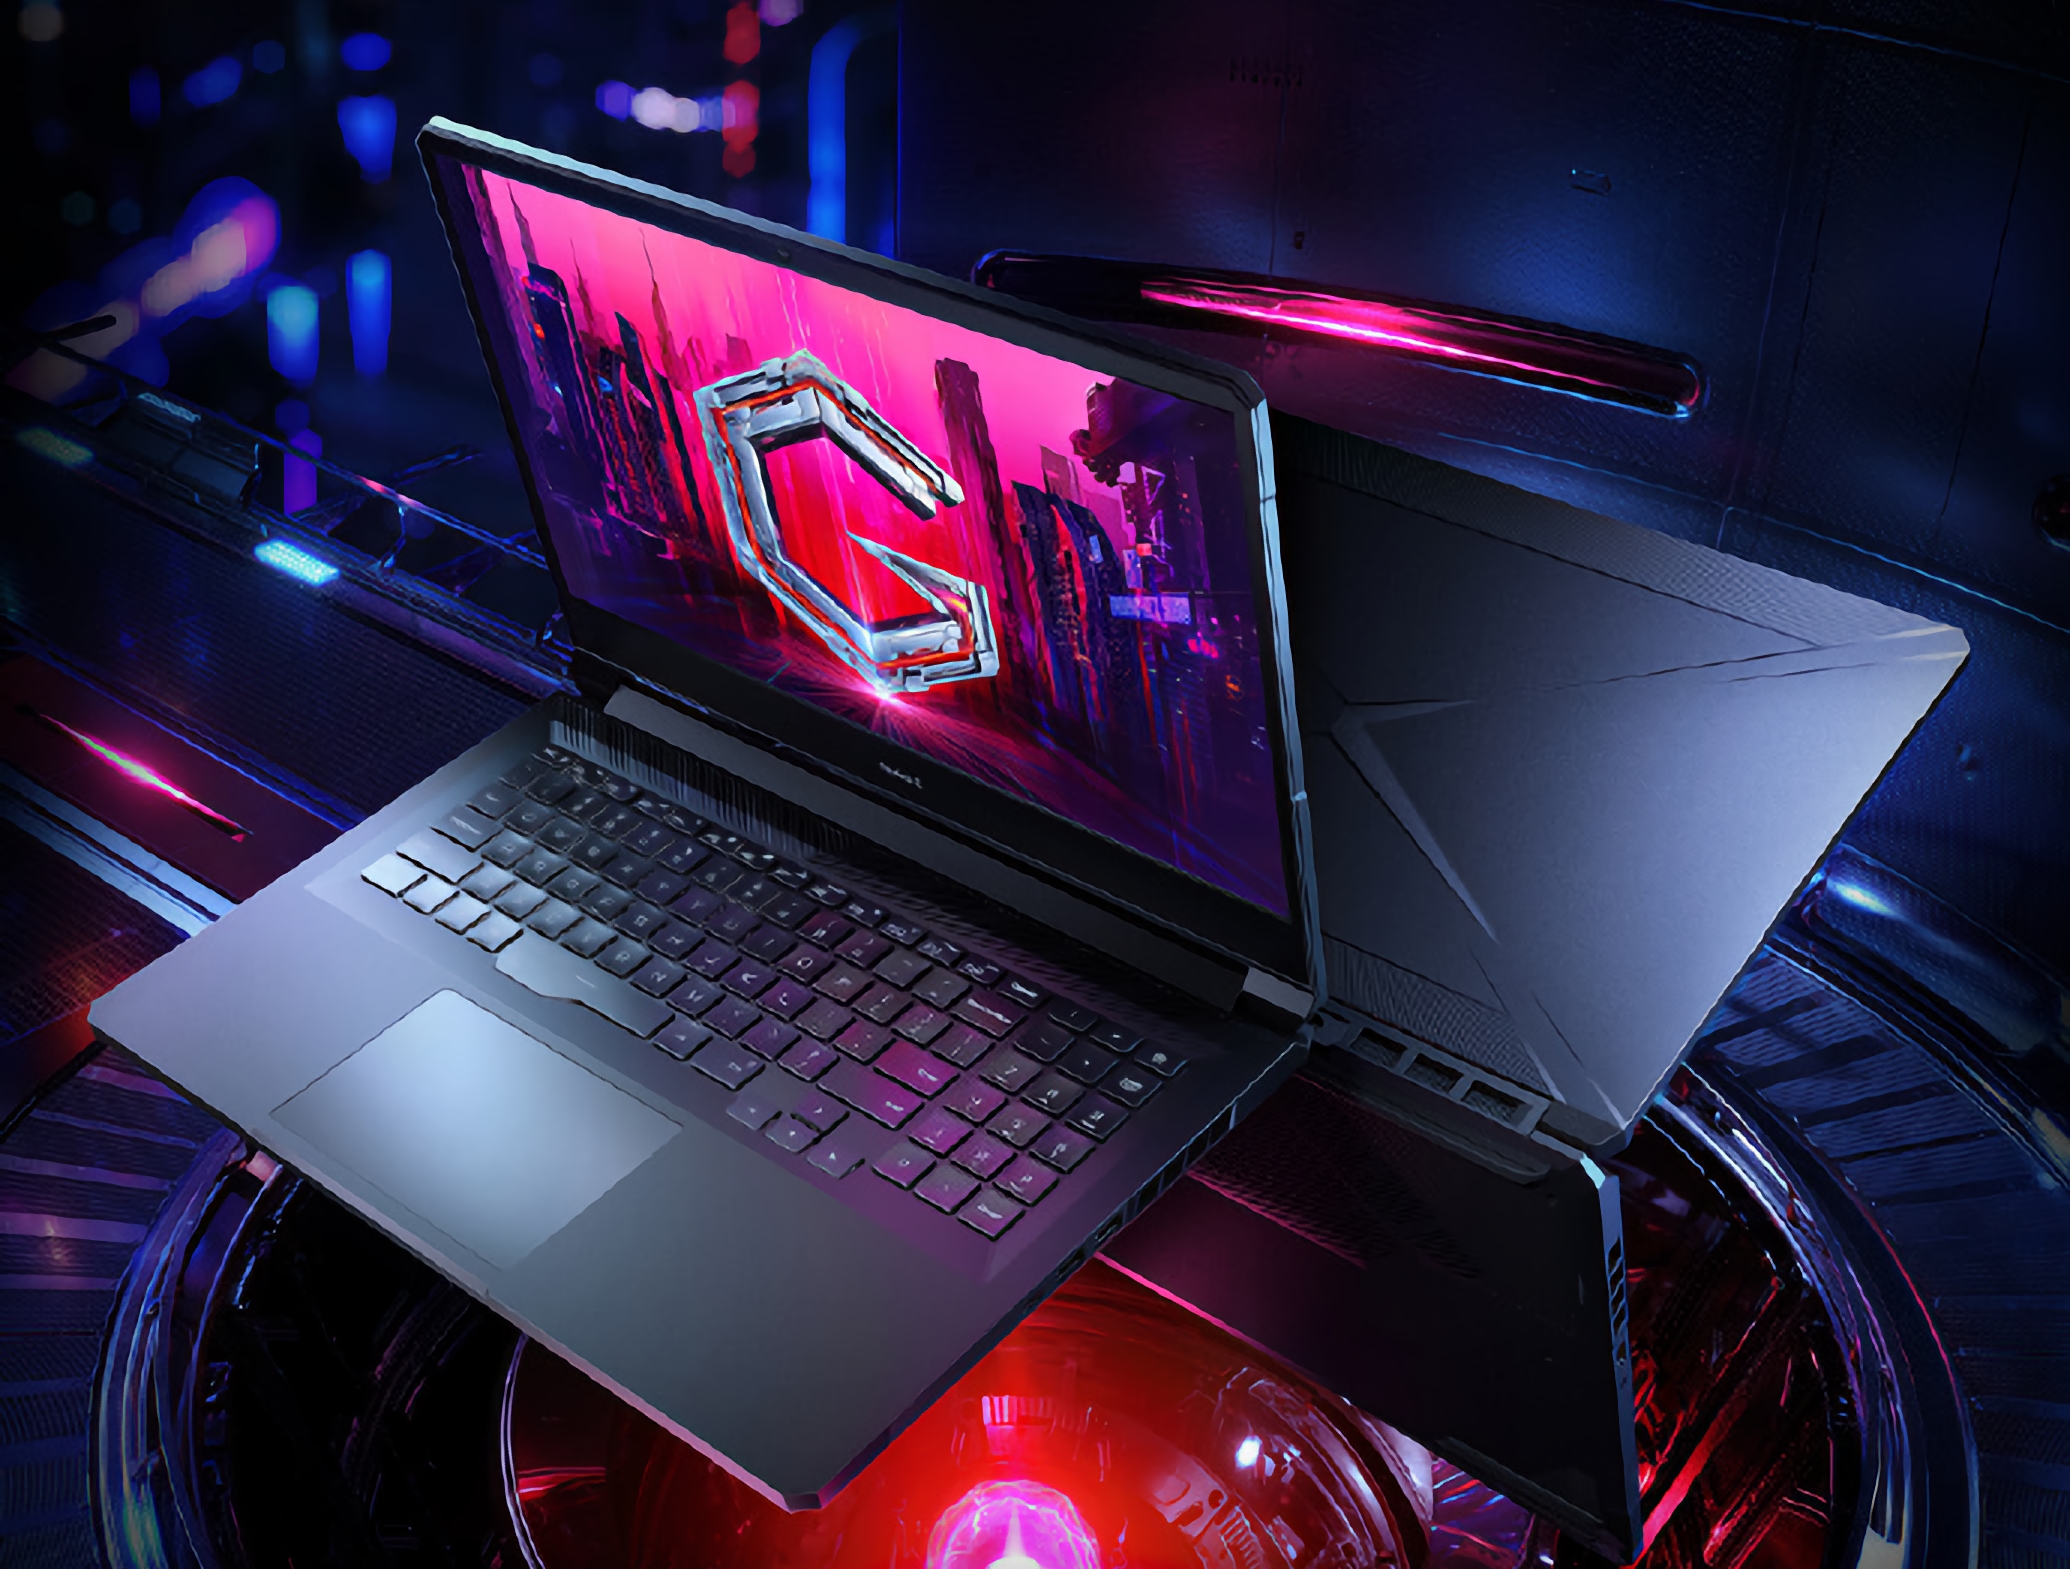 Xiaomi introduced Redmi G 2021: gaming laptop with Intel/AMD chips, GeForce RTX 3060 graphics and 144Hz screen